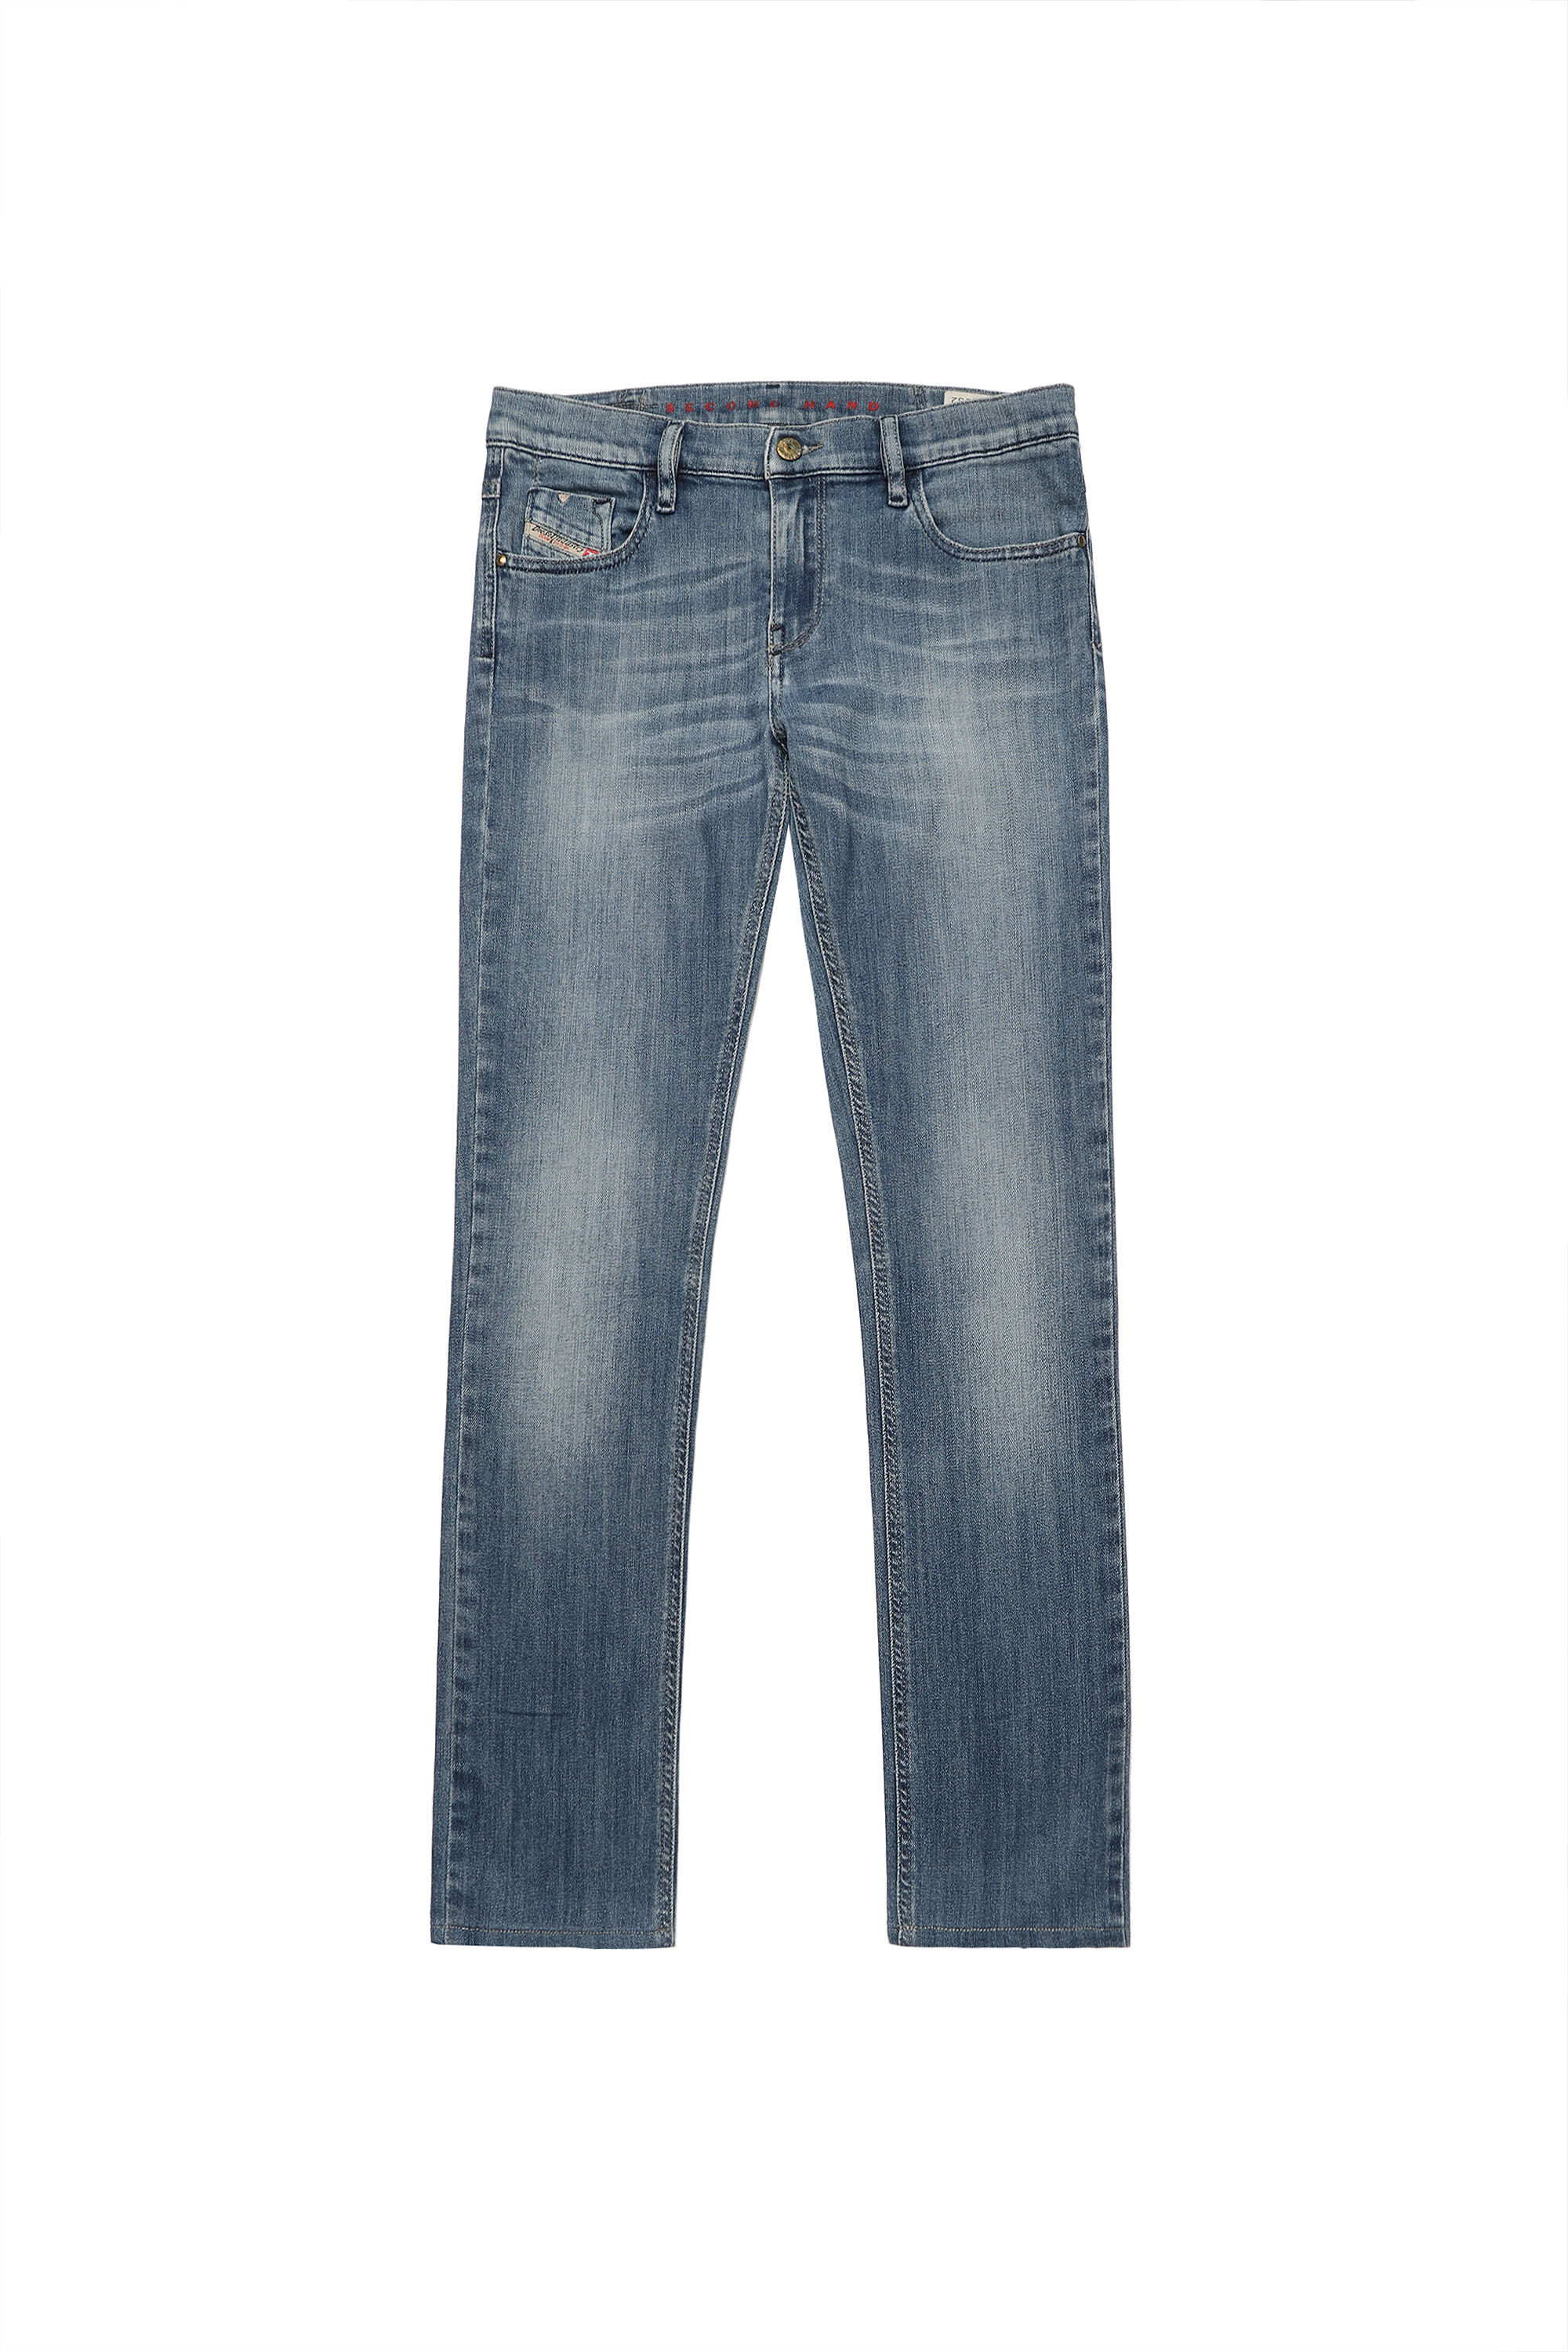 LIVY Woman - Jeans | Diesel Second Hand